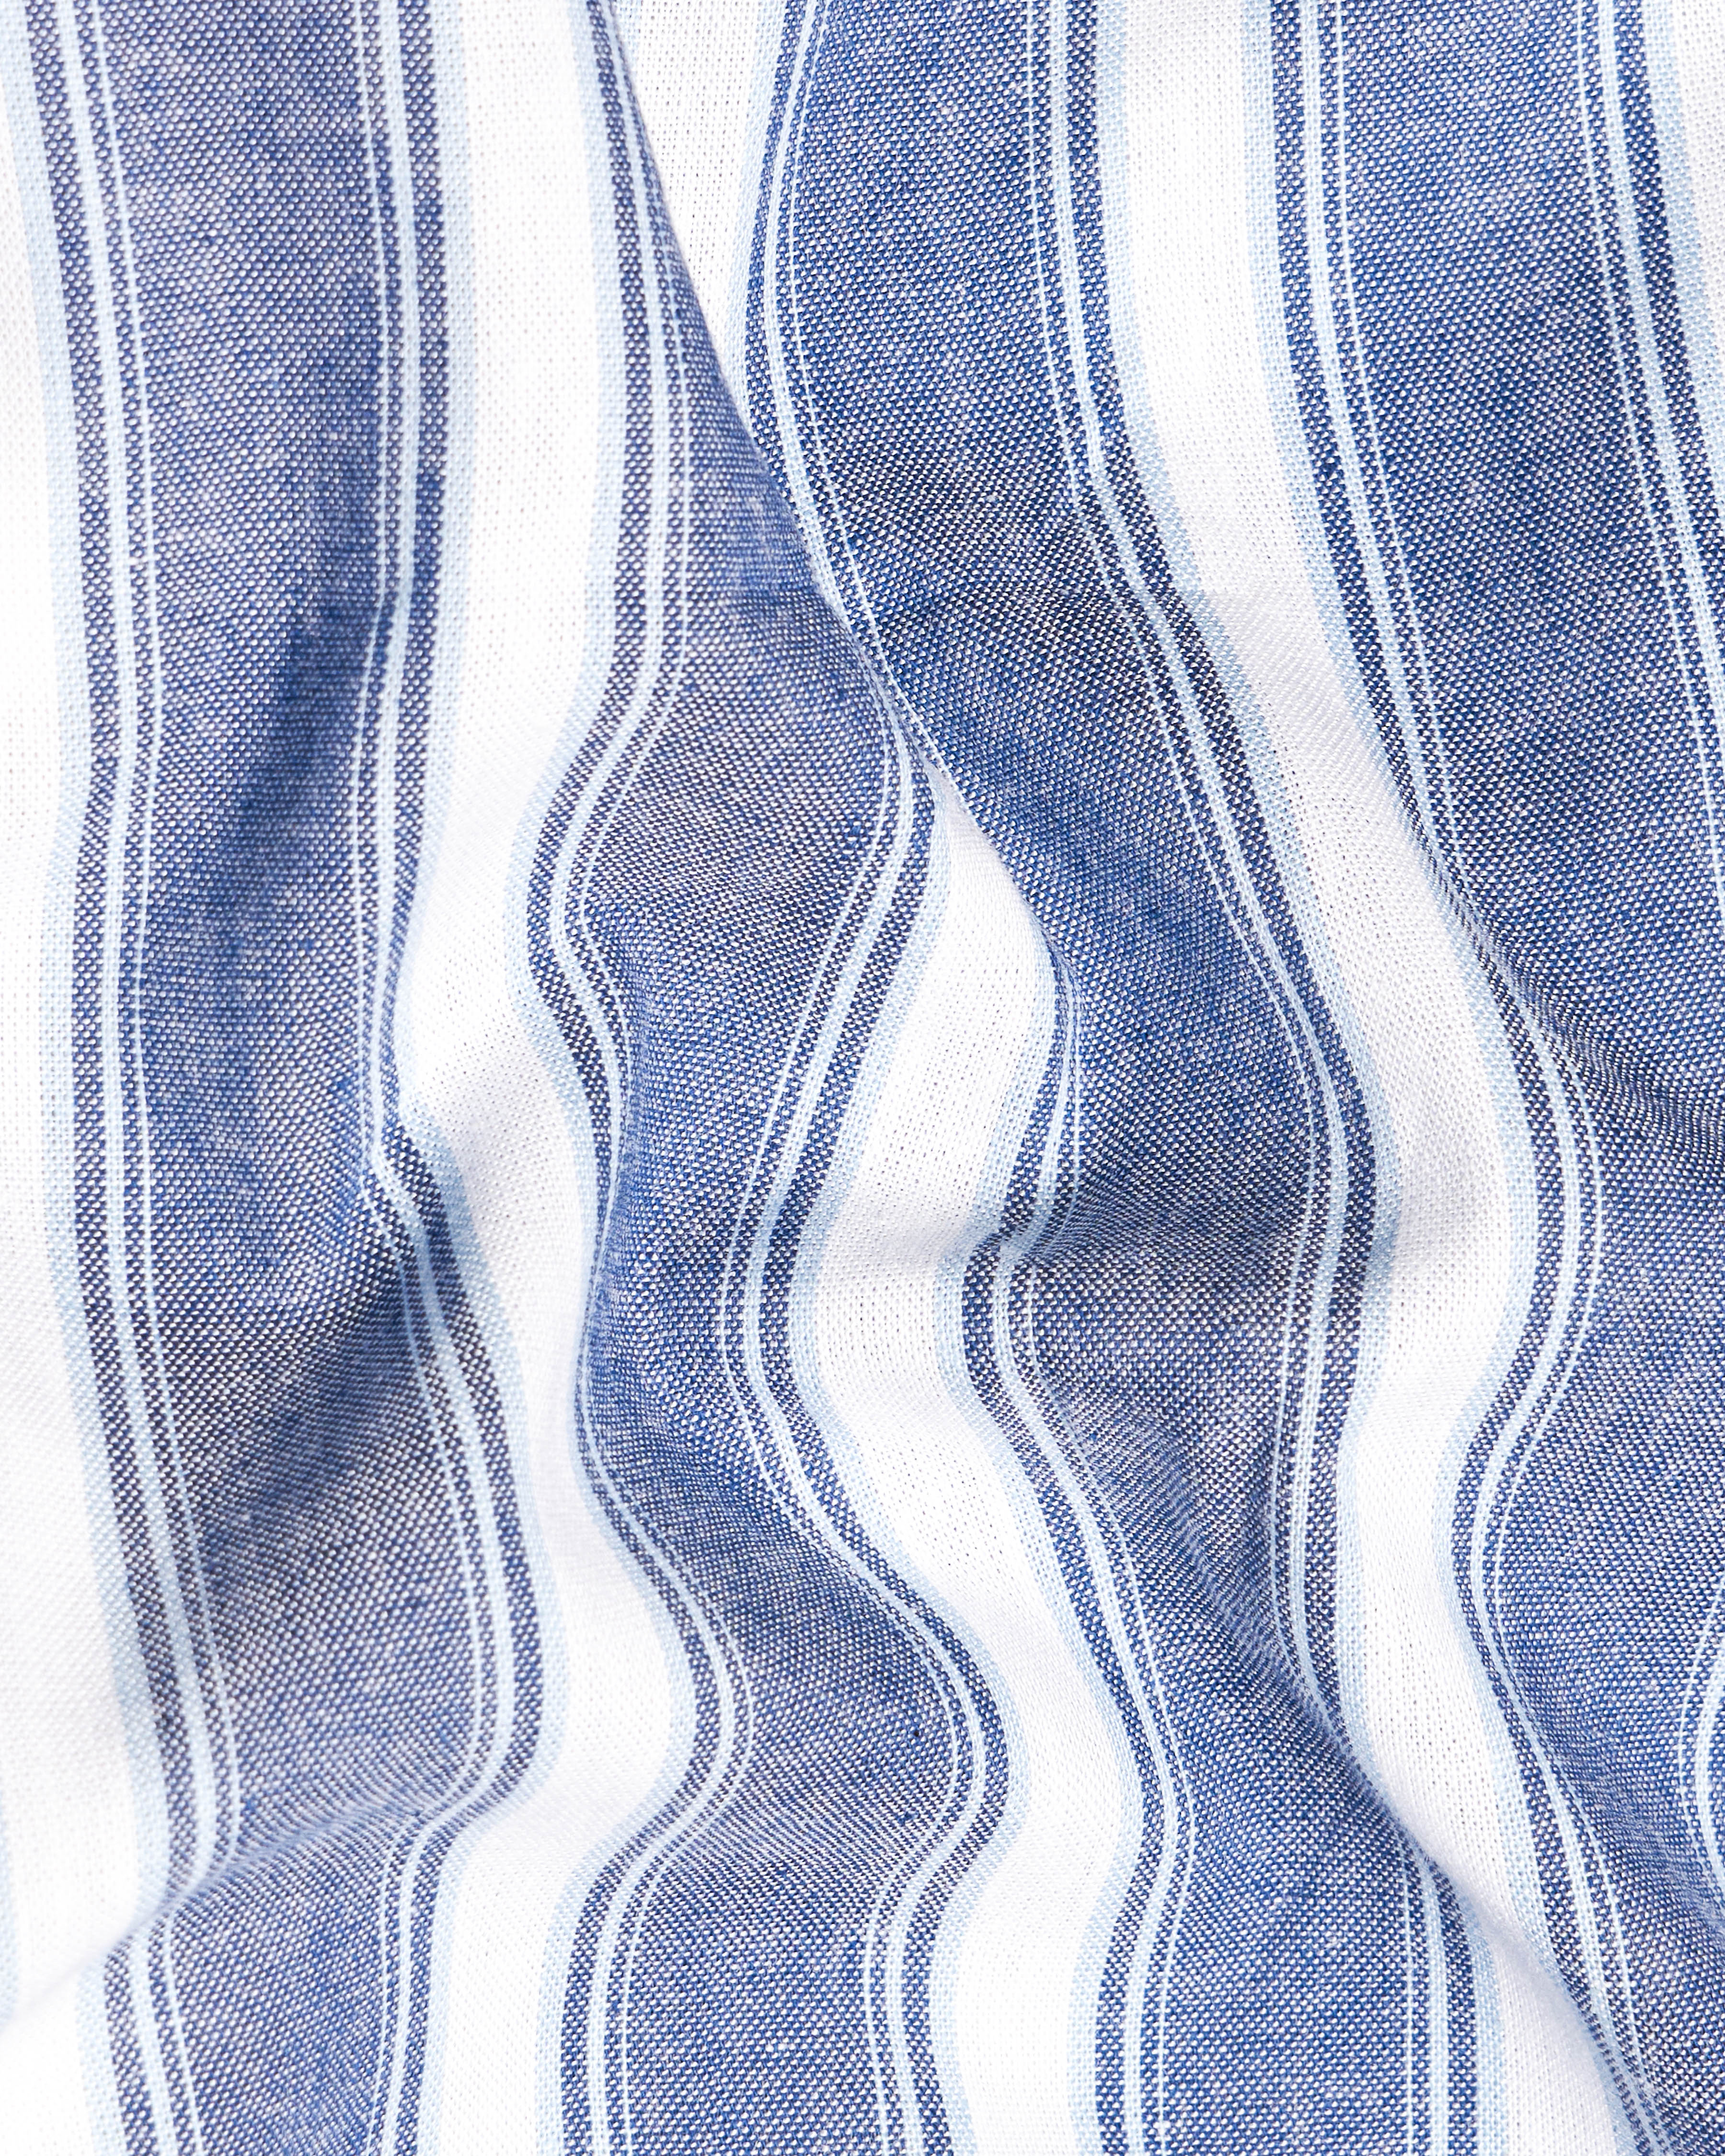 Regent Blue and White Striped Royal Oxford Shirt 9647-BD-38,9647-BD-H-38,9647-BD-39,9647-BD-H-39,9647-BD-40,9647-BD-H-40,9647-BD-42,9647-BD-H-42,9647-BD-44,9647-BD-H-44,9647-BD-46,9647-BD-H-46,9647-BD-48,9647-BD-H-48,9647-BD-50,9647-BD-H-50,9647-BD-52,9647-BD-H-52